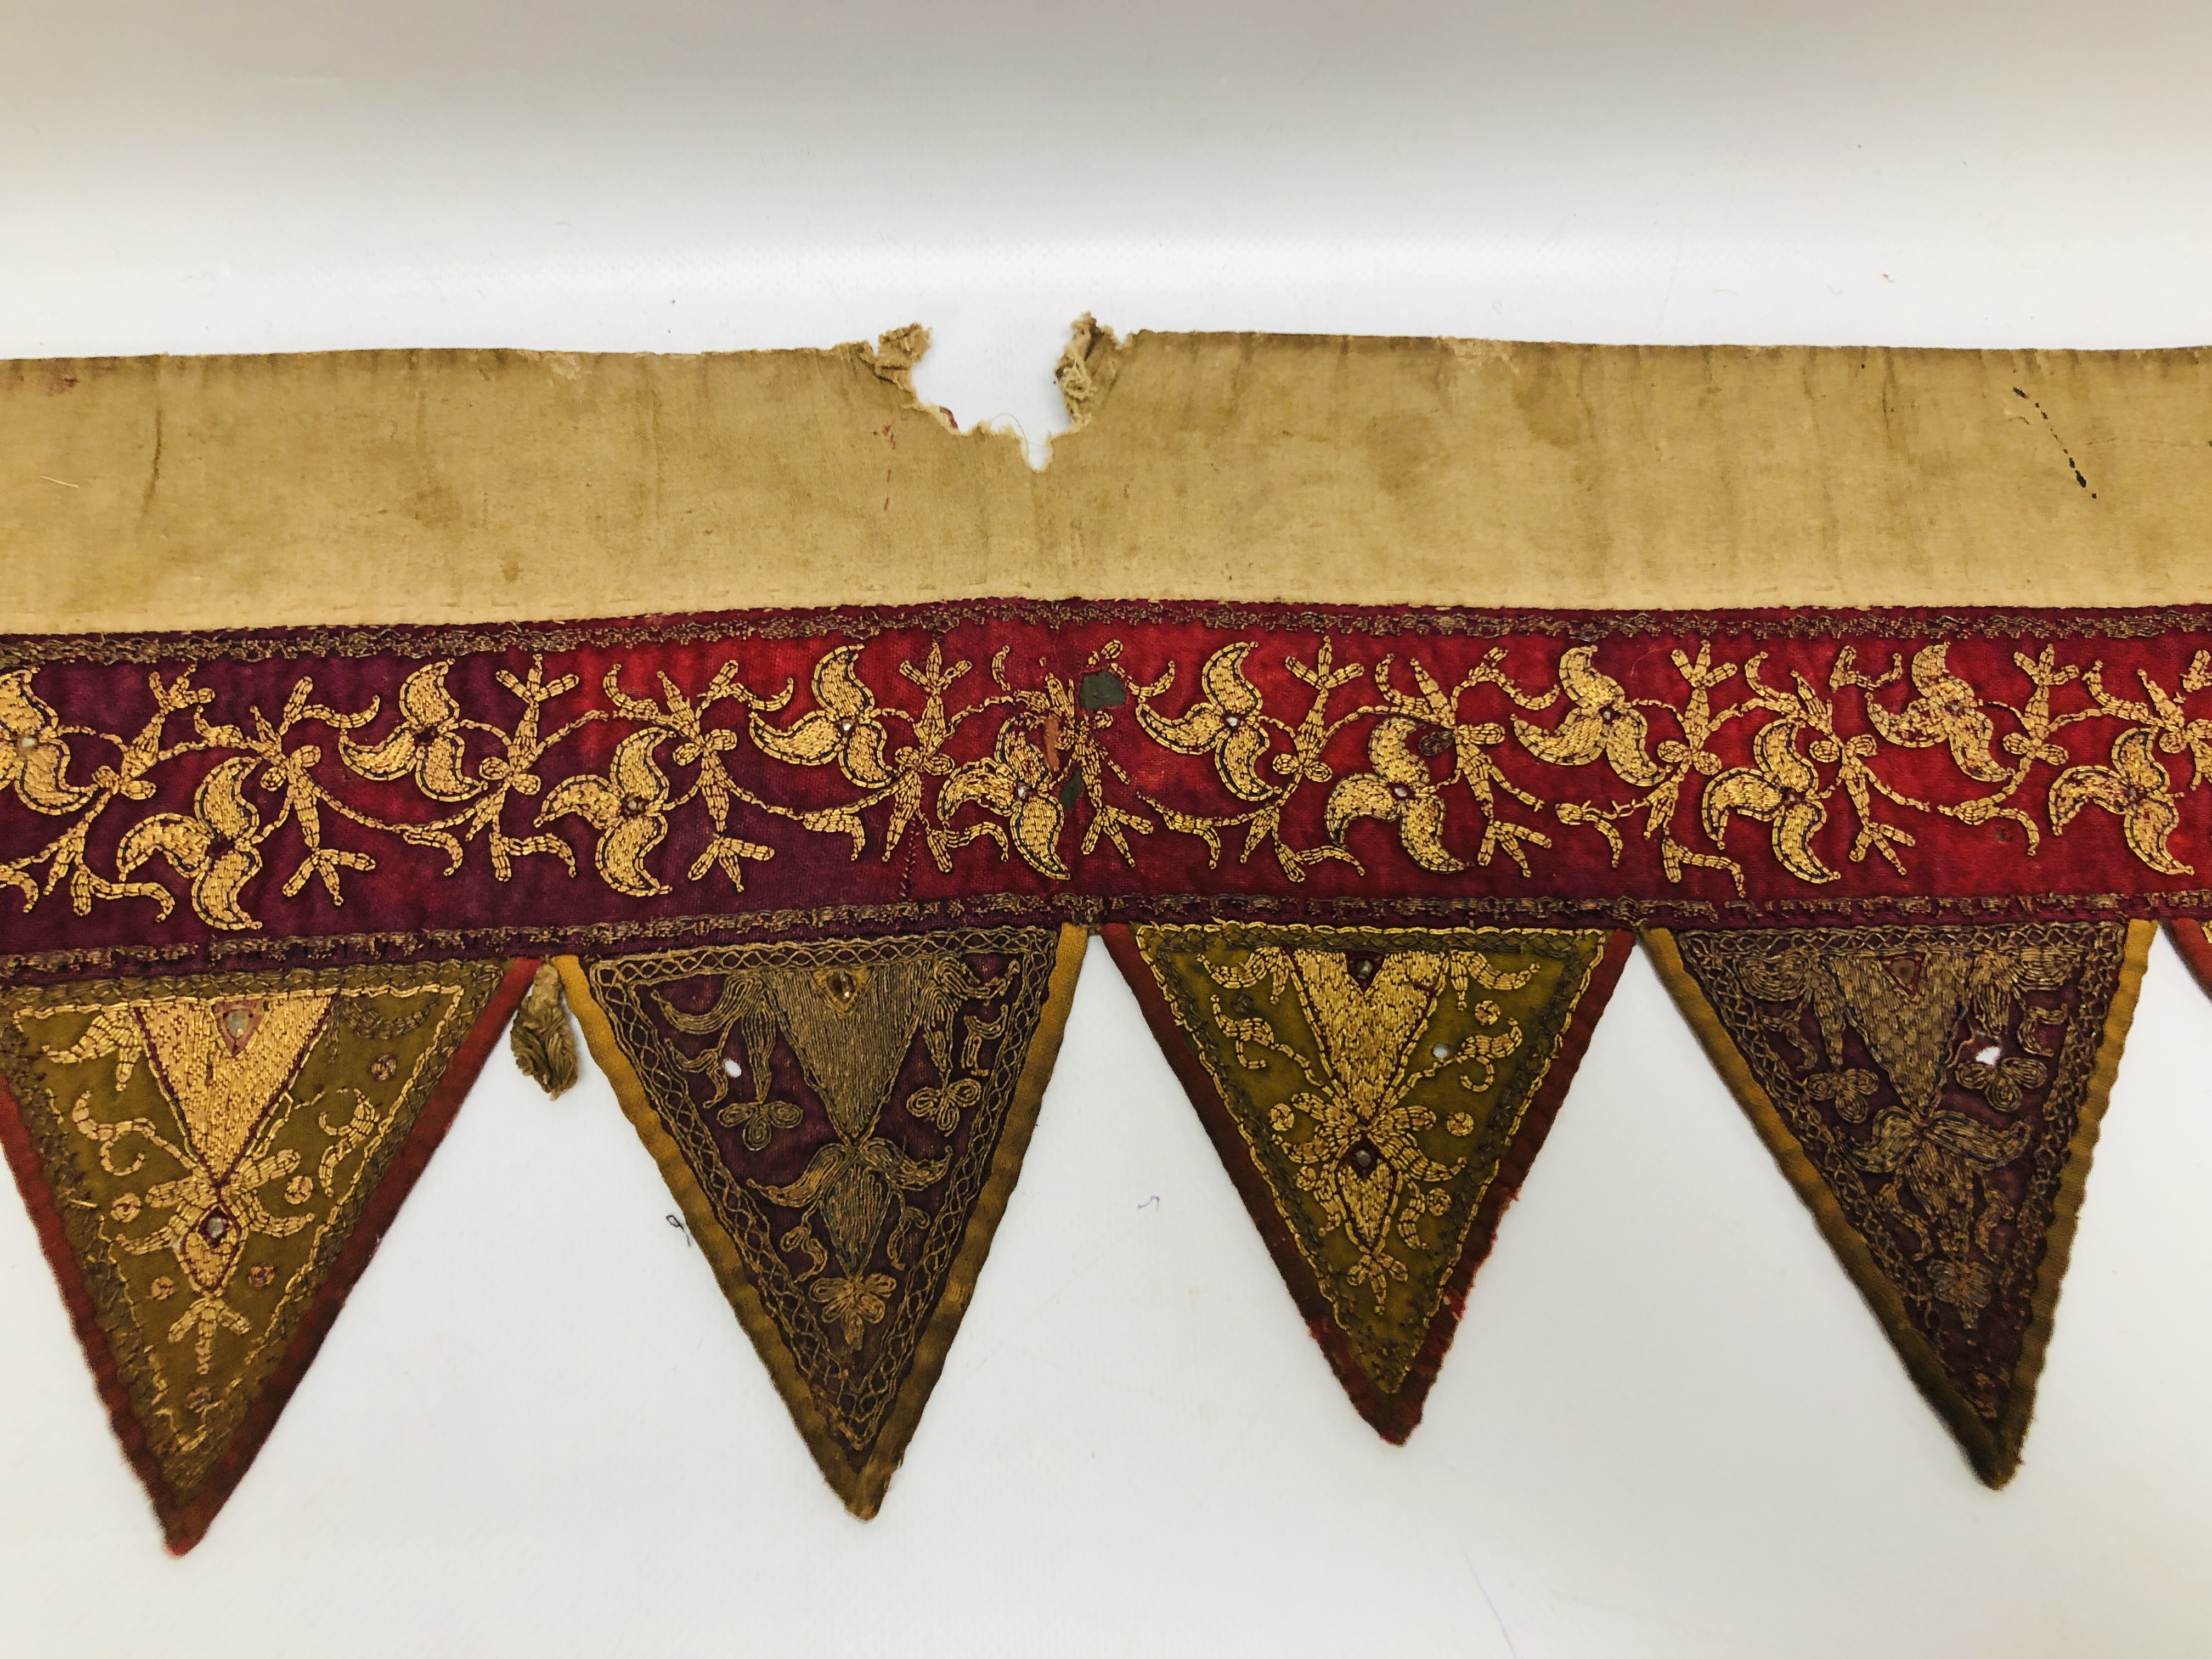 TWO AFGHAN EMBROIDERED DOOR HANGINGS WORKED WITH GOLD THREAD, 122CM AND 84CM. - Image 12 of 14